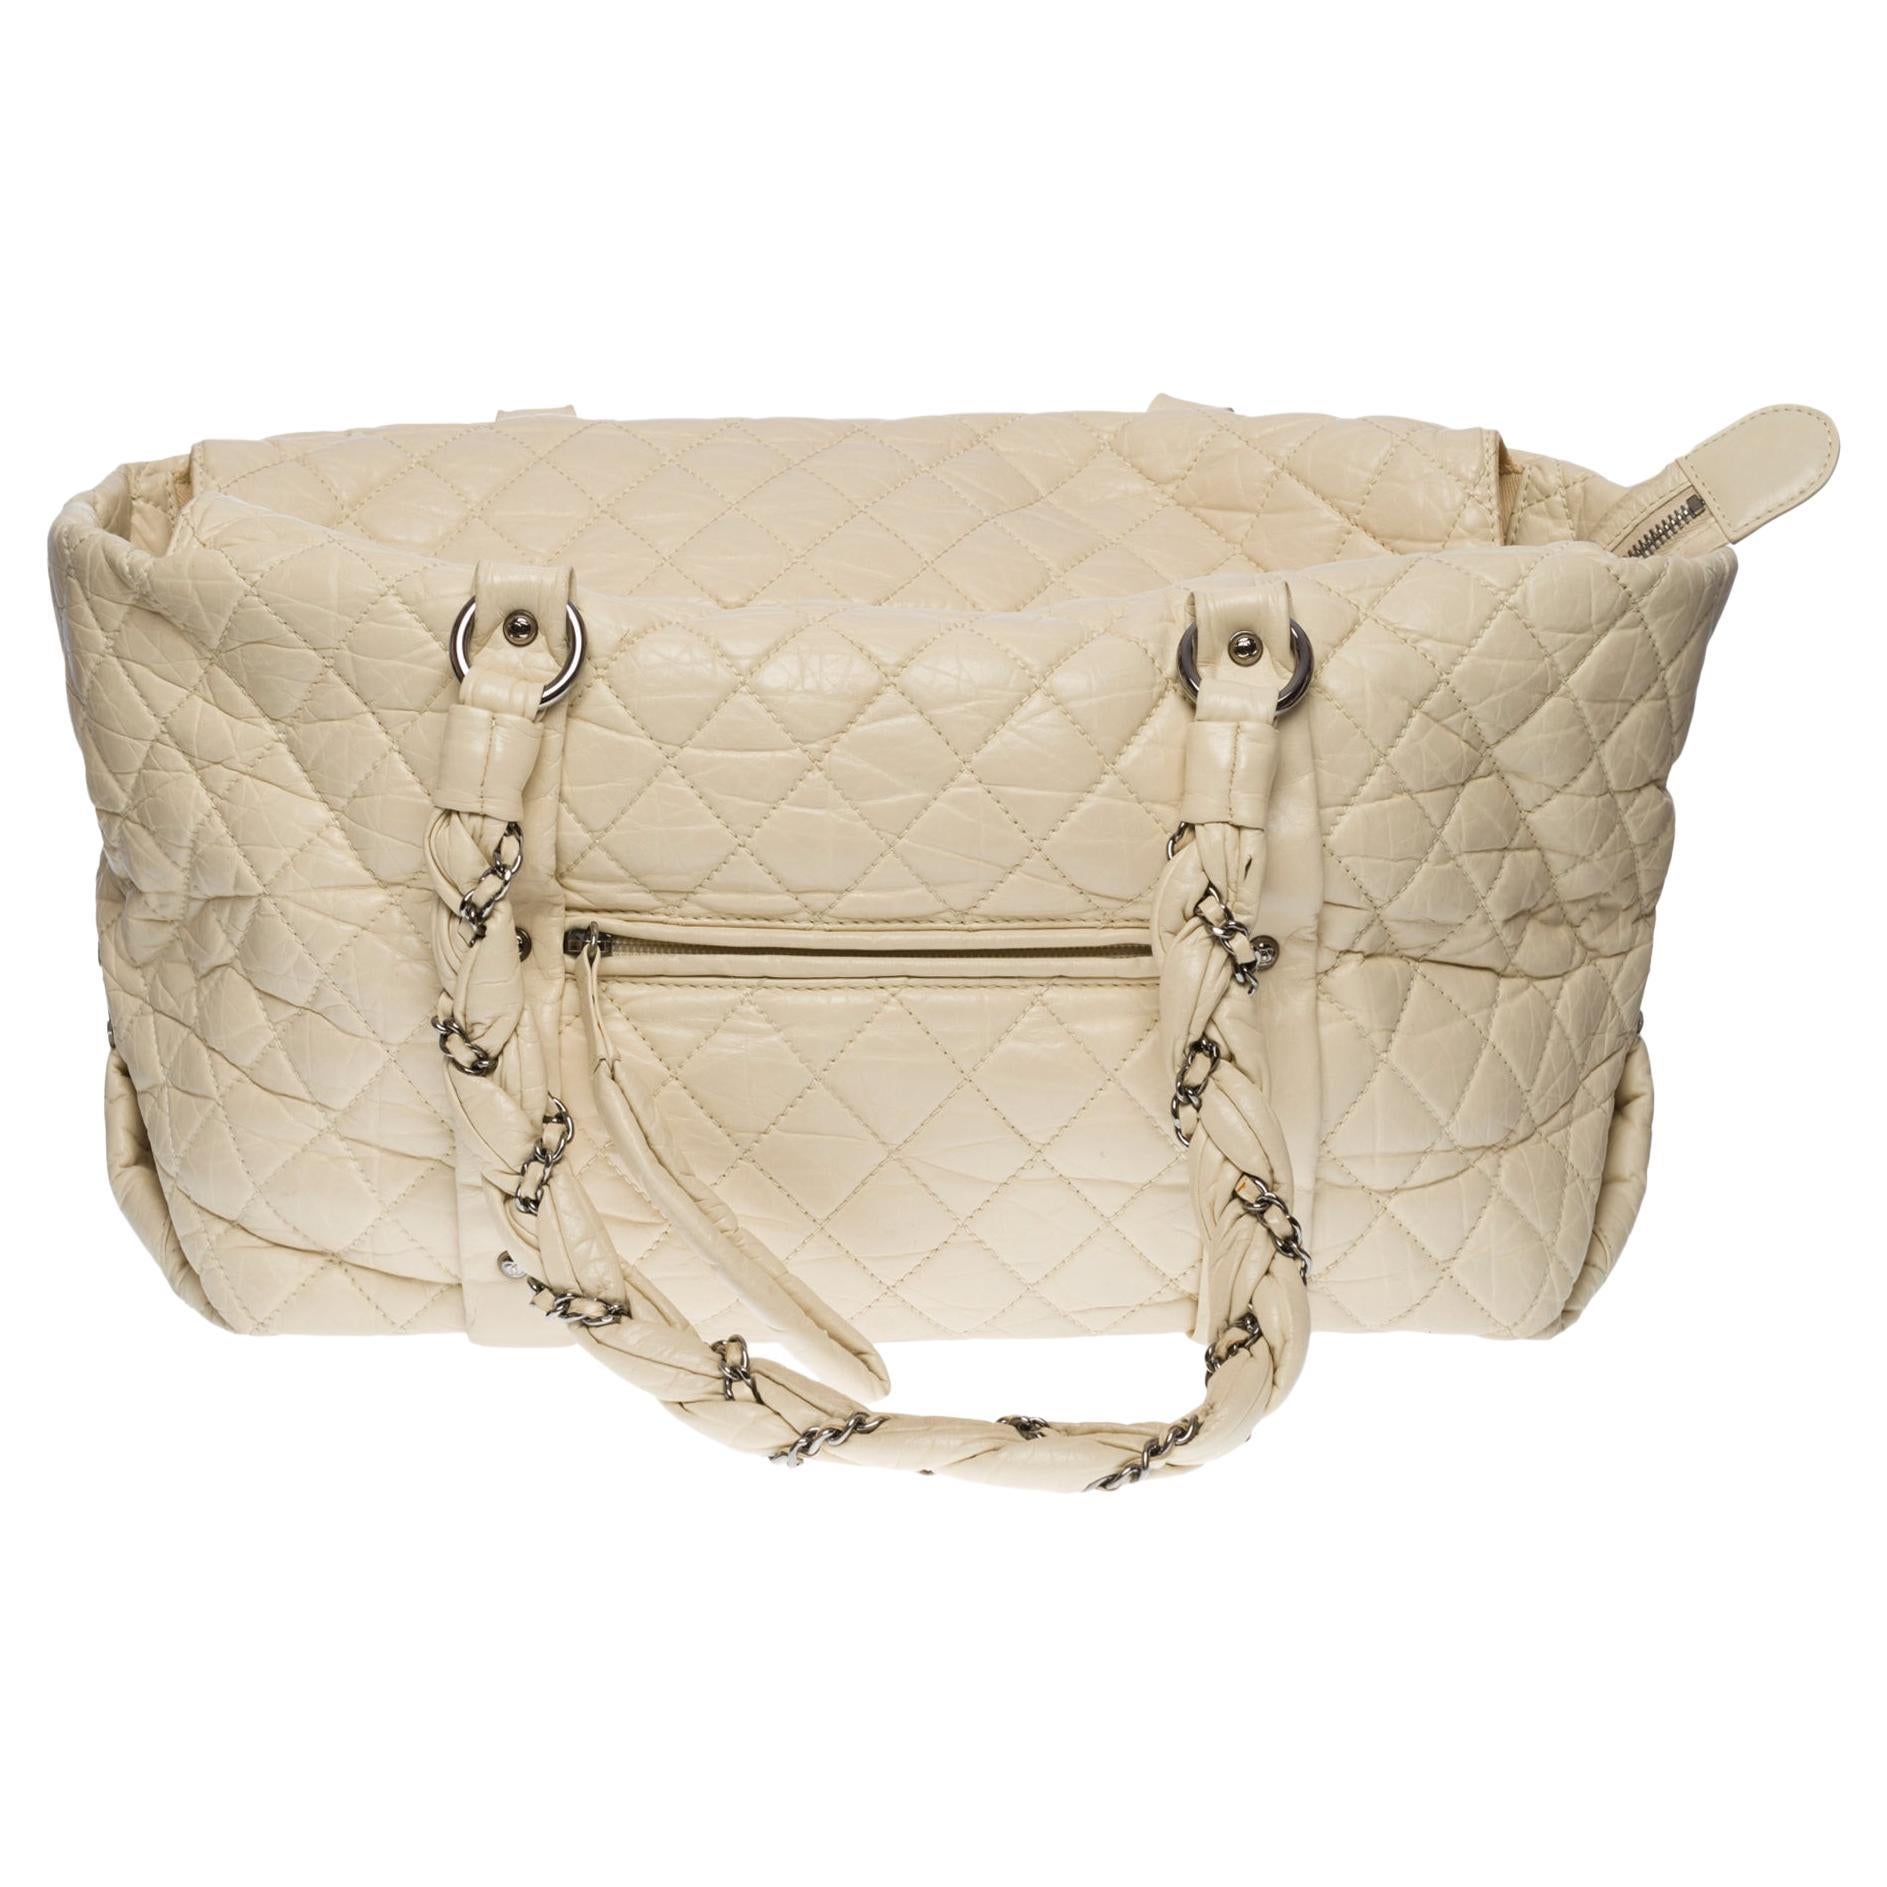 Chanel Puffy Bag - 19 For Sale on 1stDibs